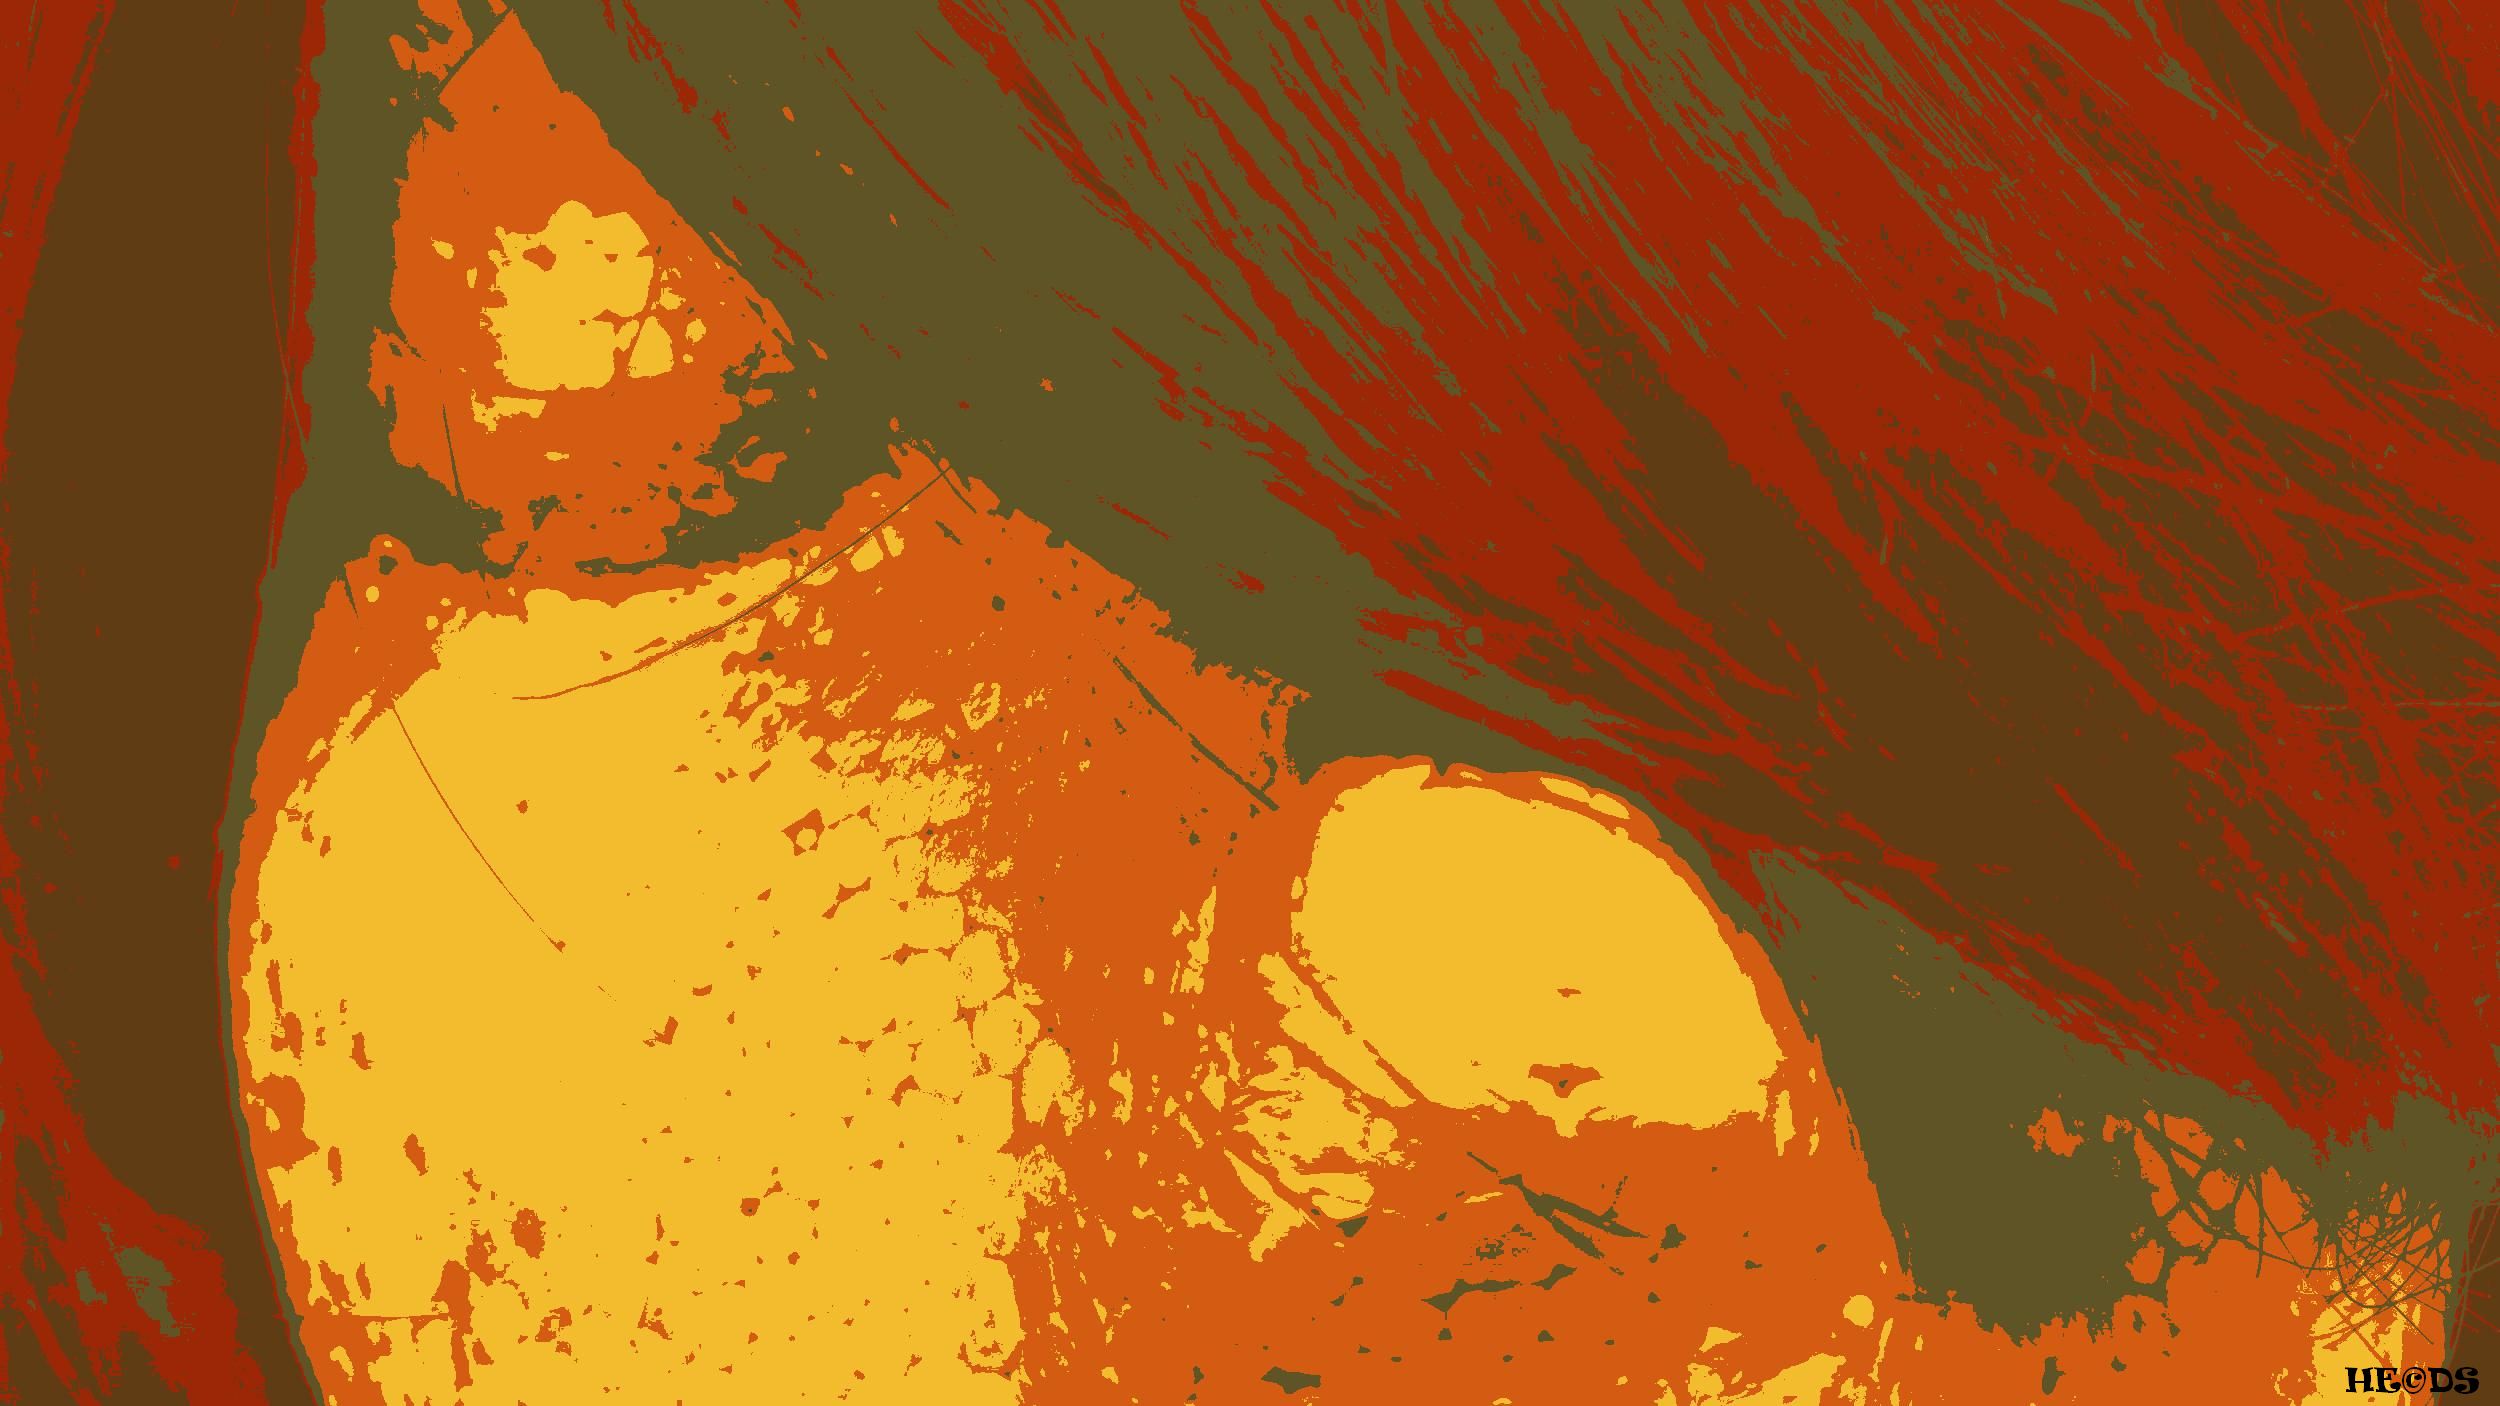 close up of face, hair covering one eye, put through a red brown posterize palette filter